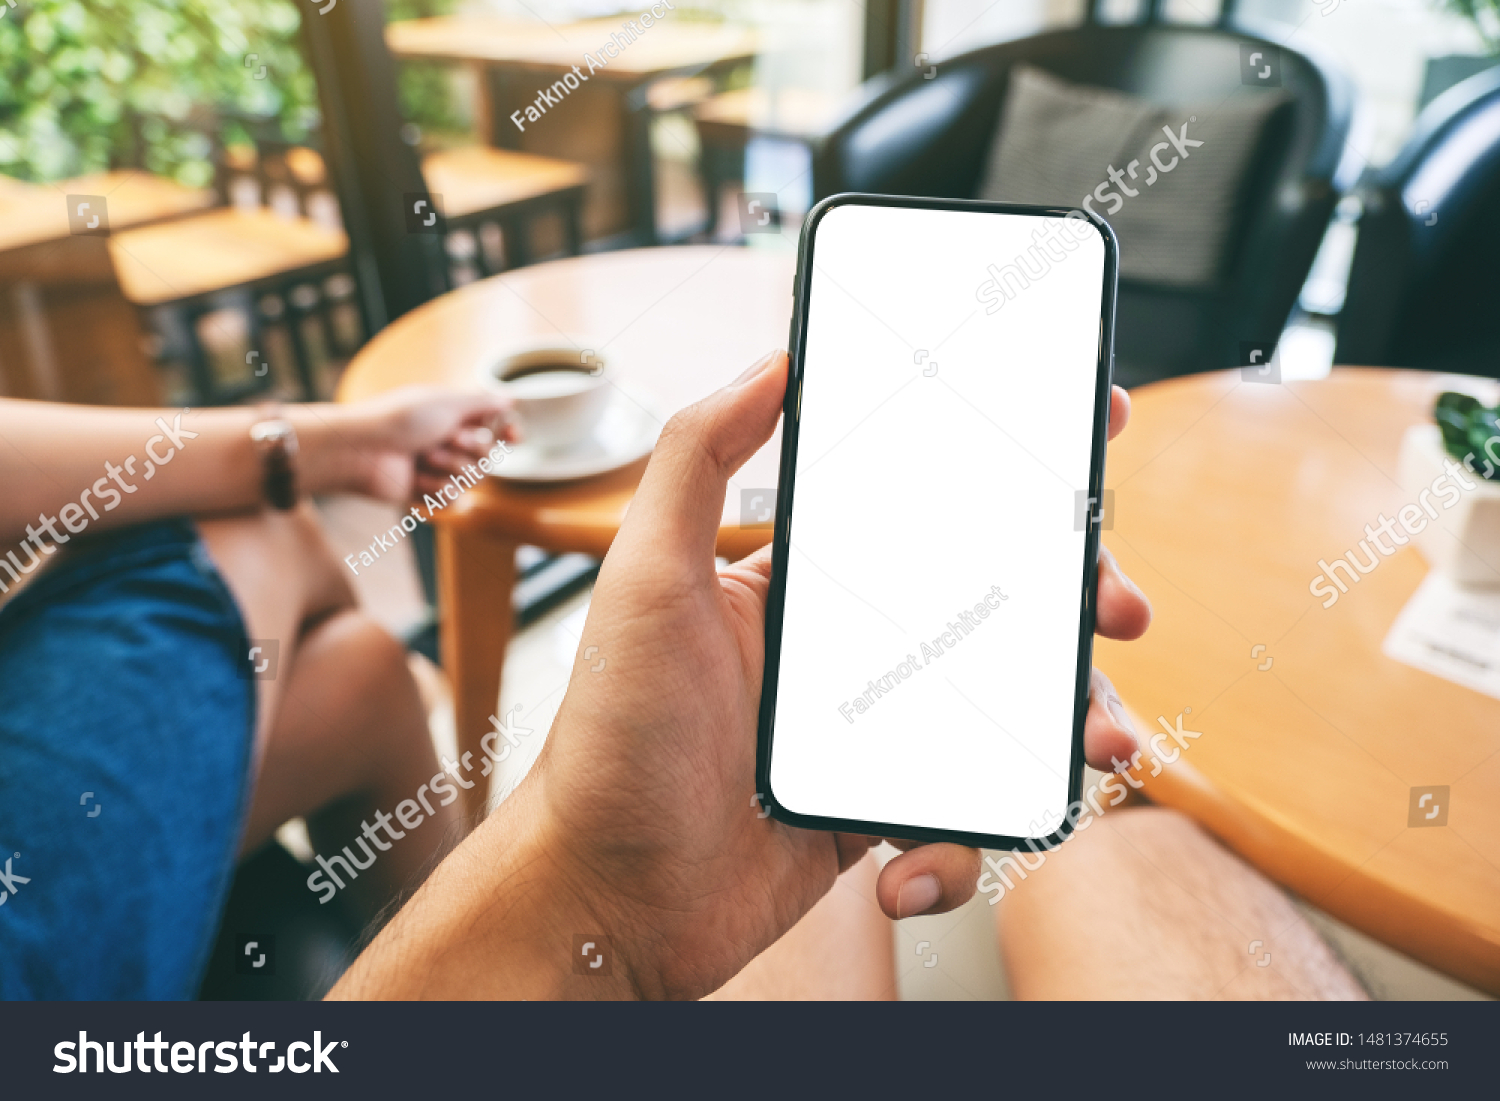 Mockup image of a man's hand holding black mobile phone with blank white screen with woman drinking coffee in cafe #1481374655